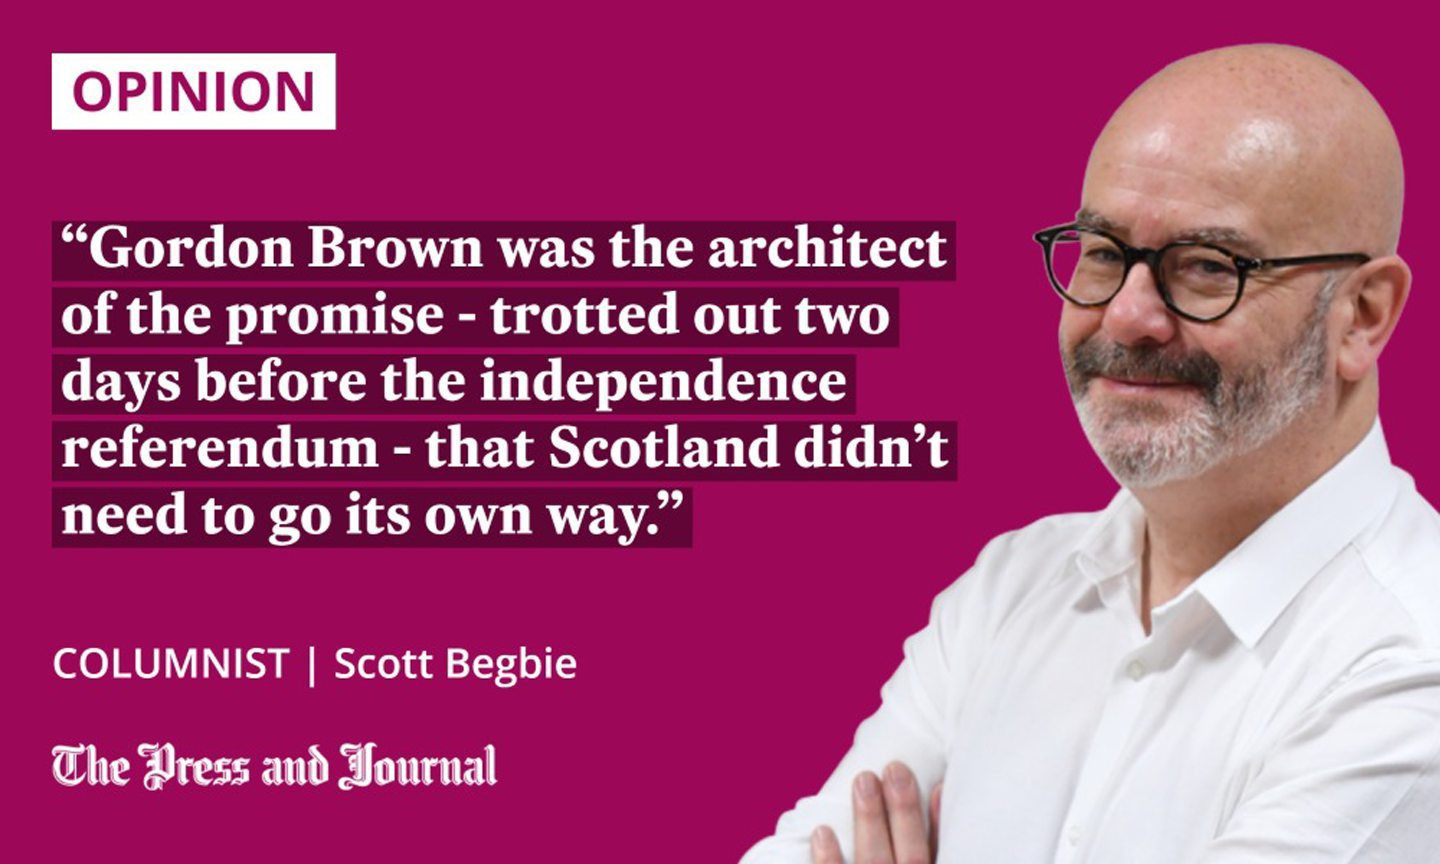 Our columnist, Scott Begbie on gordon brown: "gordon brown was the architect of the promise - trotted out two days before the independence referendum - that scotland didn't need to go it's own way."